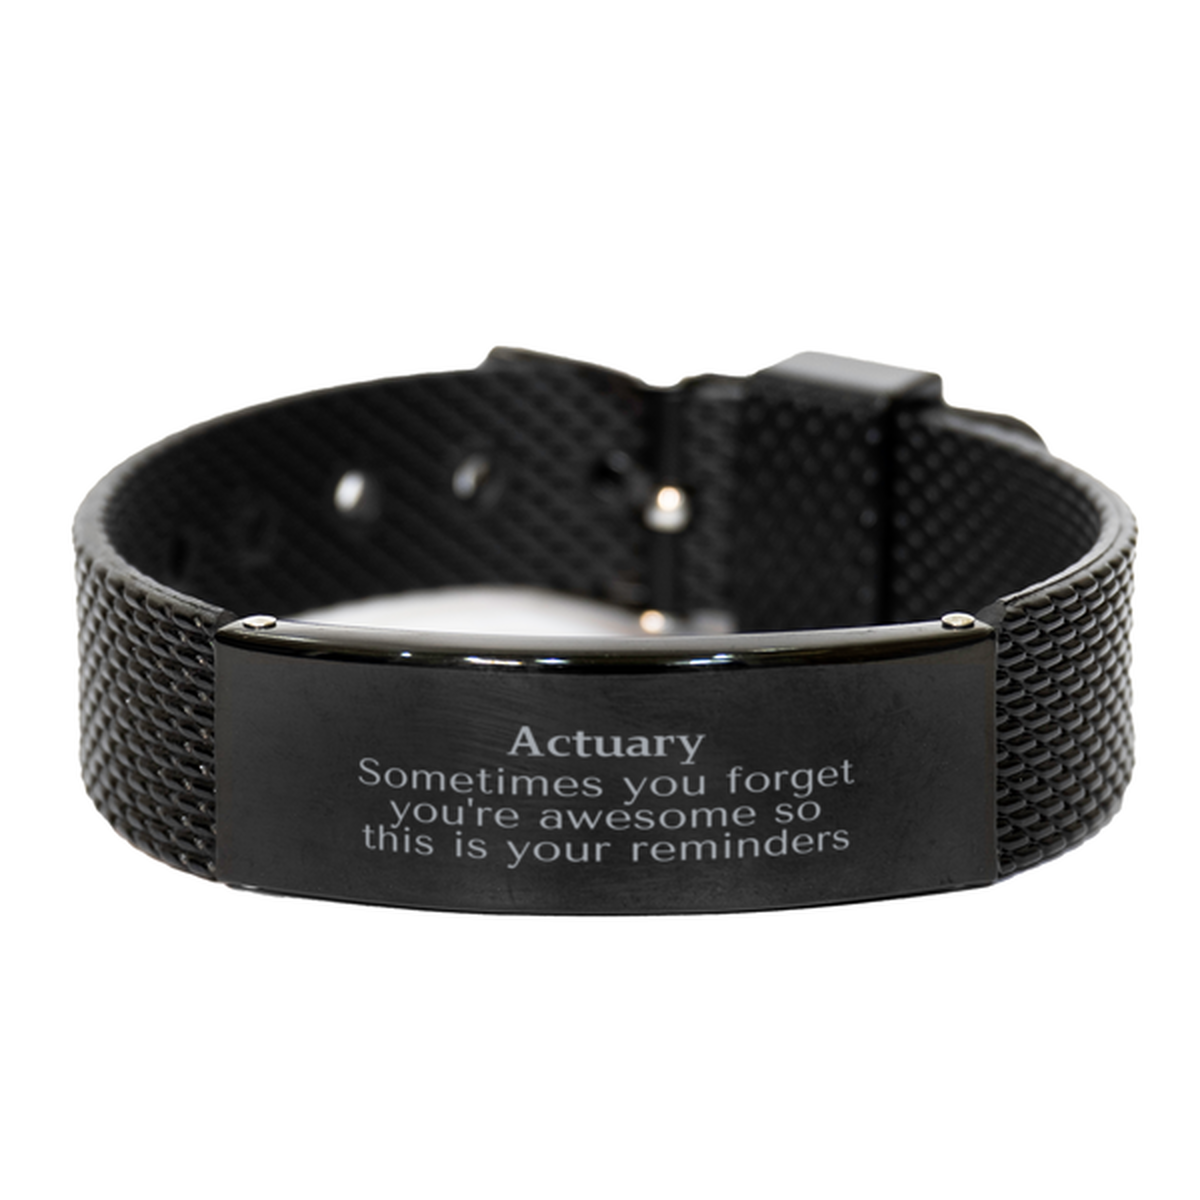 Sentimental Actuary Black Shark Mesh Bracelet, Actuary Sometimes you forget you're awesome so this is your reminders, Graduation Christmas Birthday Gifts for Actuary, Men, Women, Coworkers